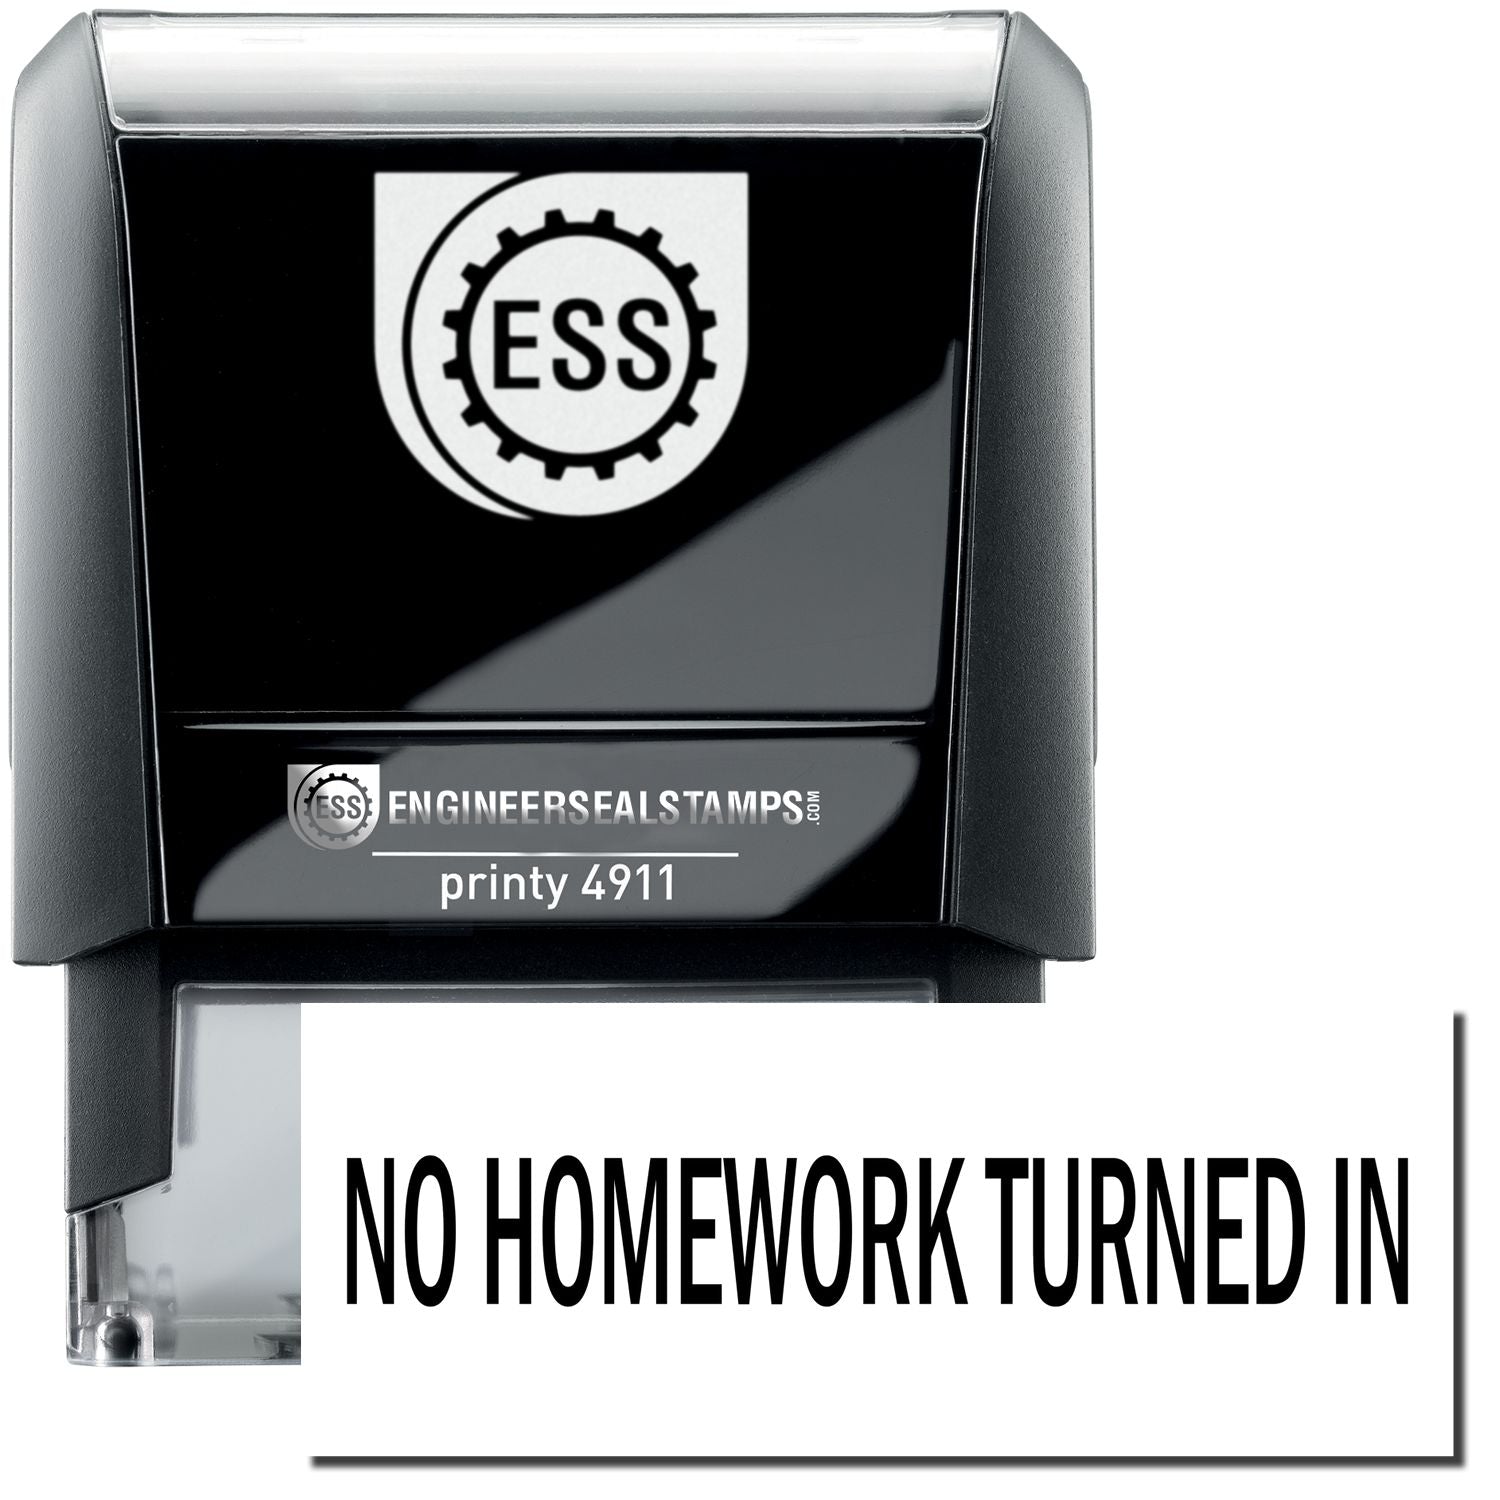 A self-inking stamp with a stamped image showing how the text "NO HOMEWORK TURNED IN" is displayed after stamping.